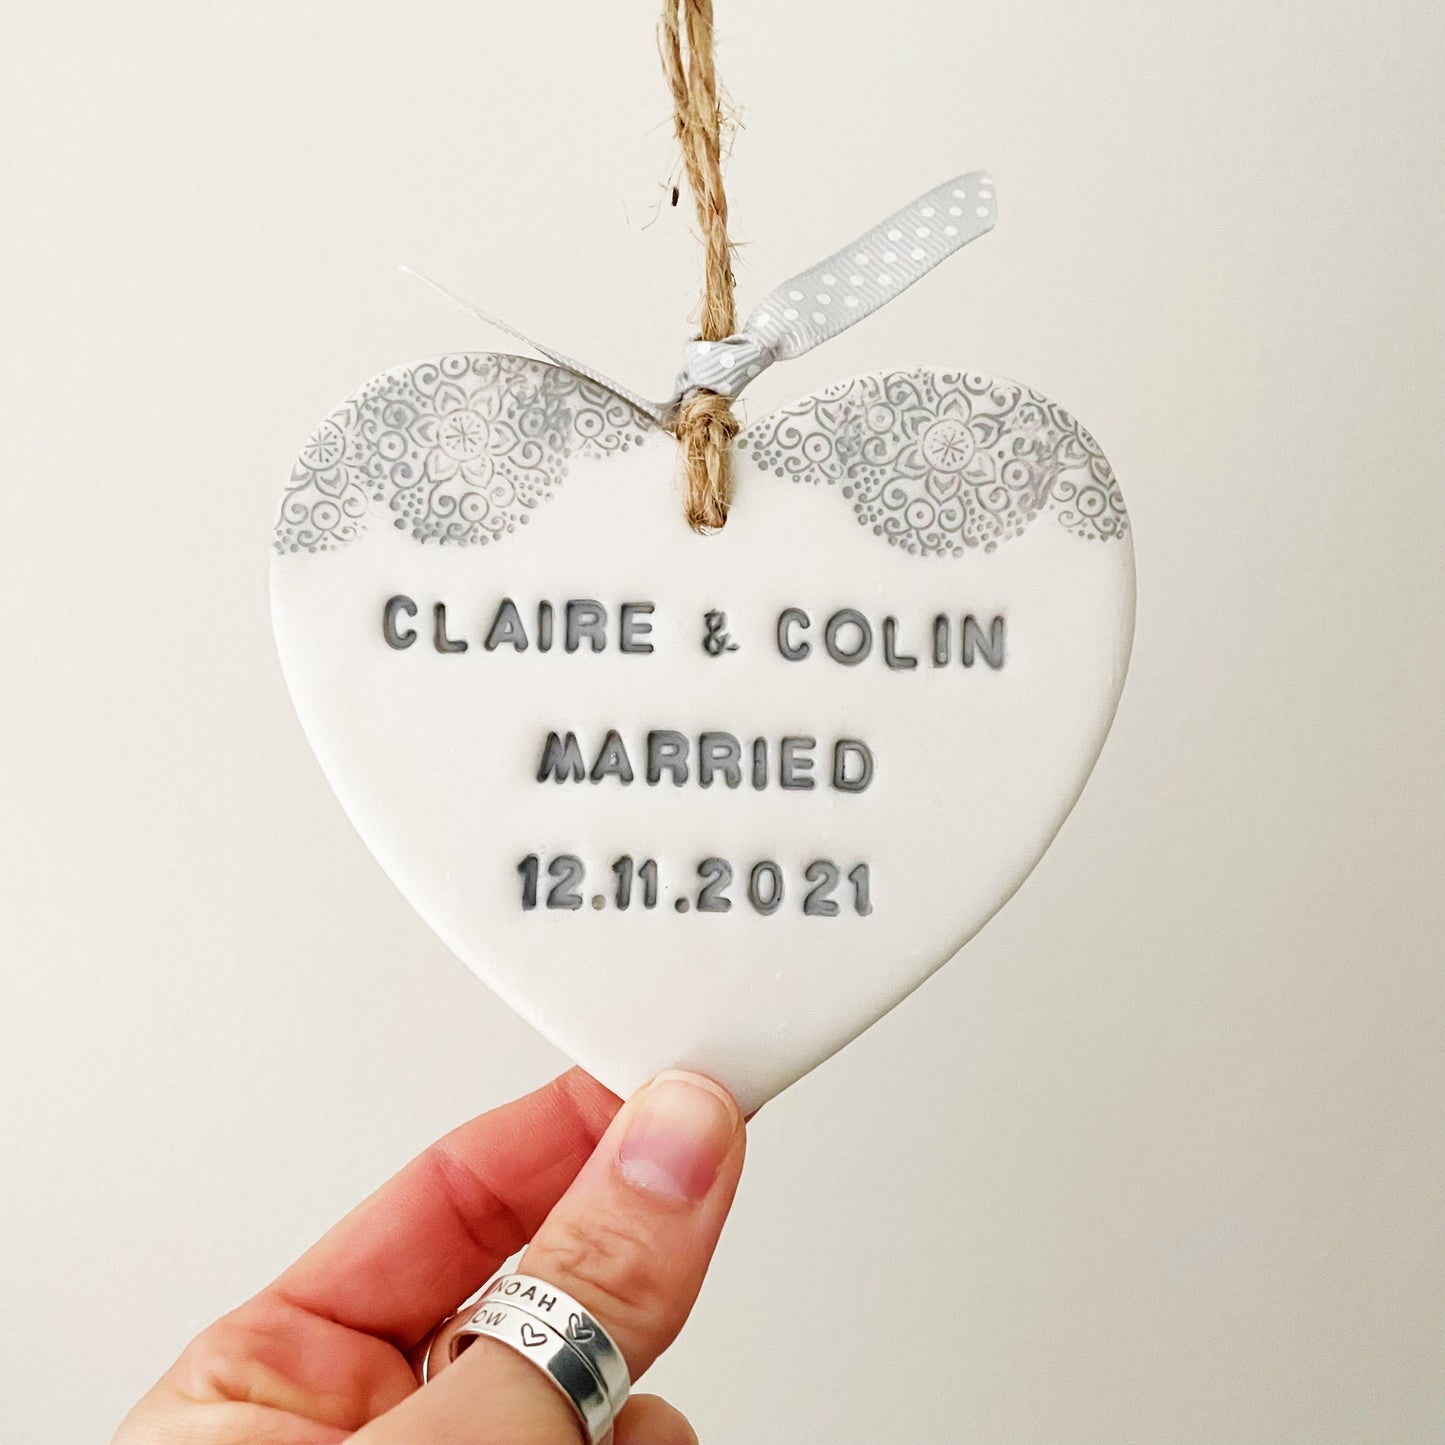 Personalised wedding gift, pearlised white clay hanging heart with a grey lace edge at the top of the heart, the heart is personalised with CLAIRE & COLIN MARRIED 12.11.2021